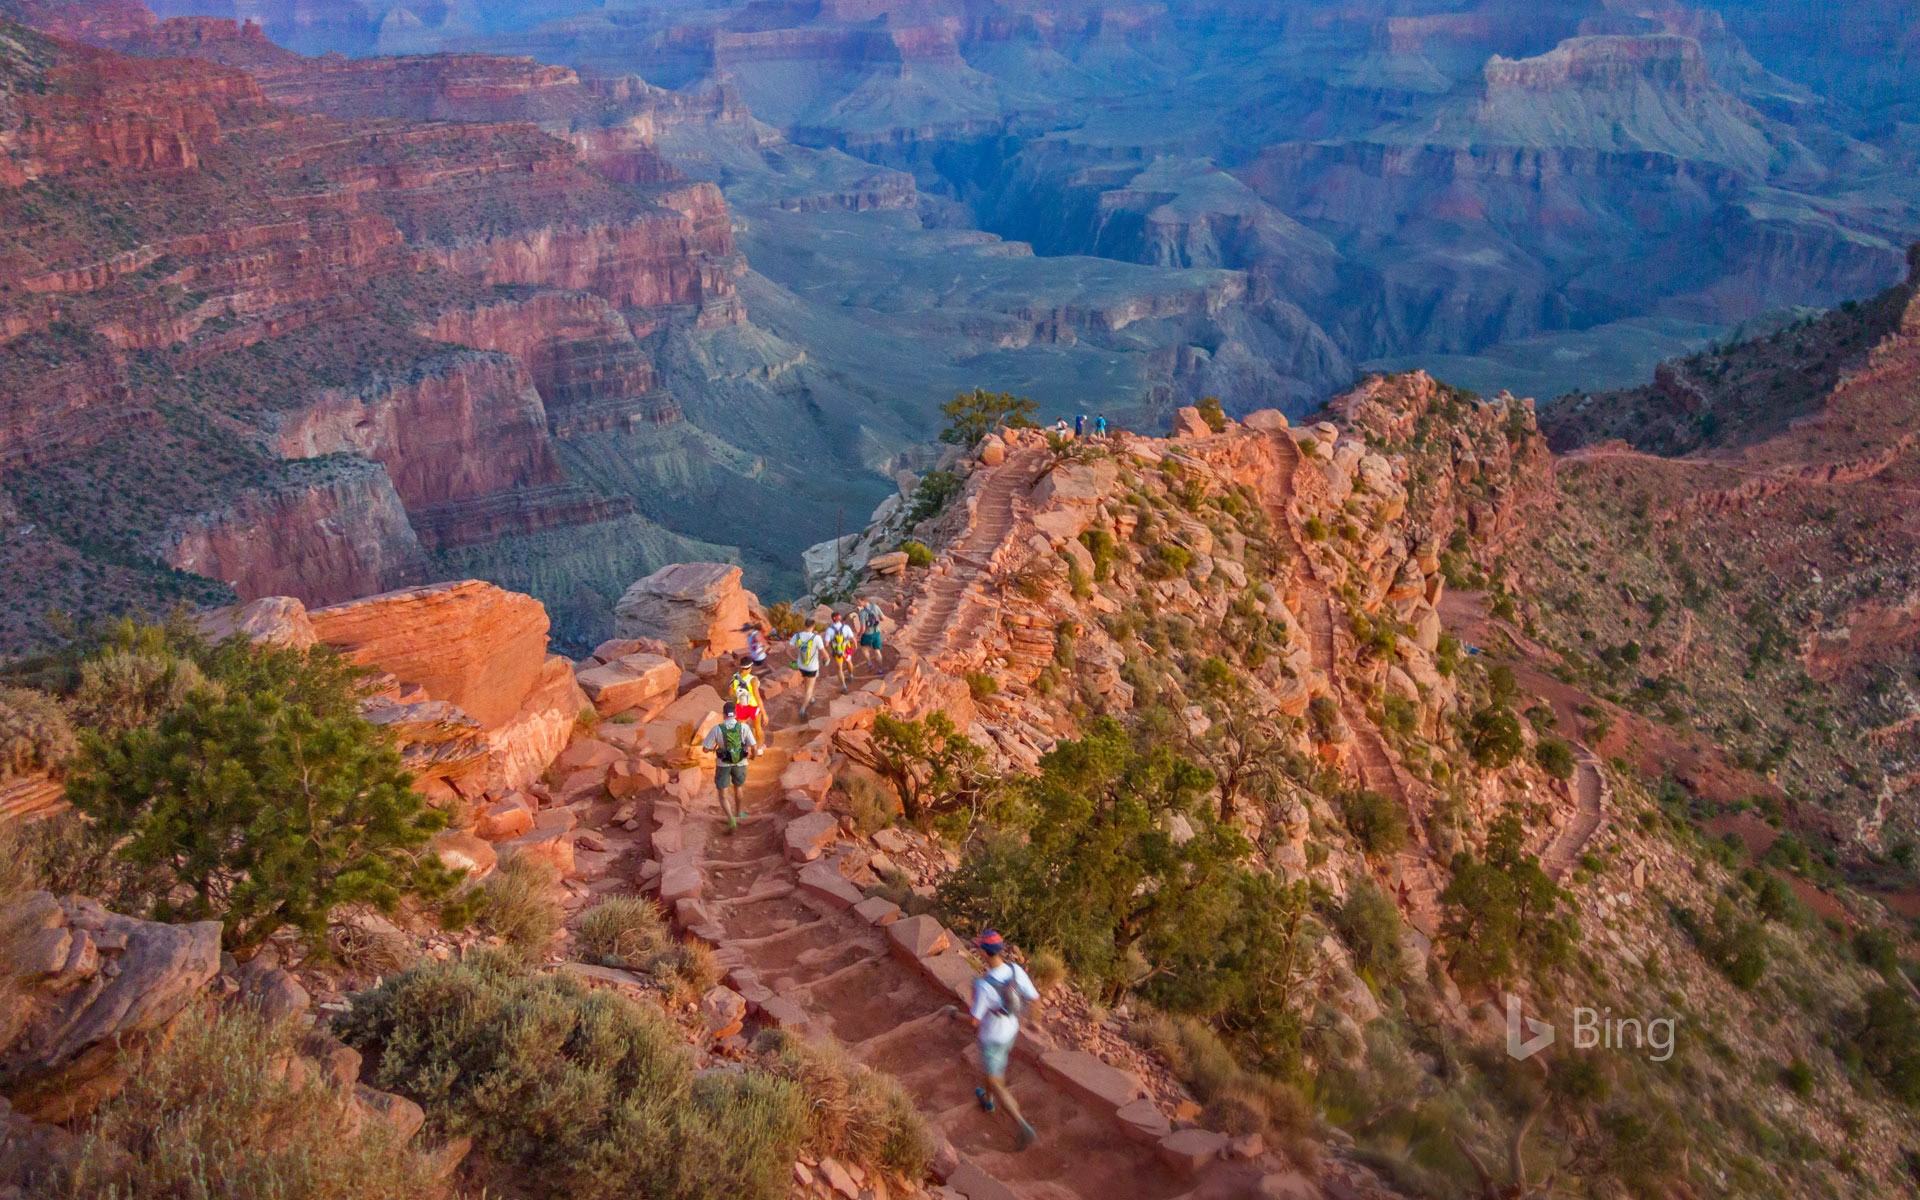 Runners on the South Kaibab Trail in the Grand Canyon, Arizona